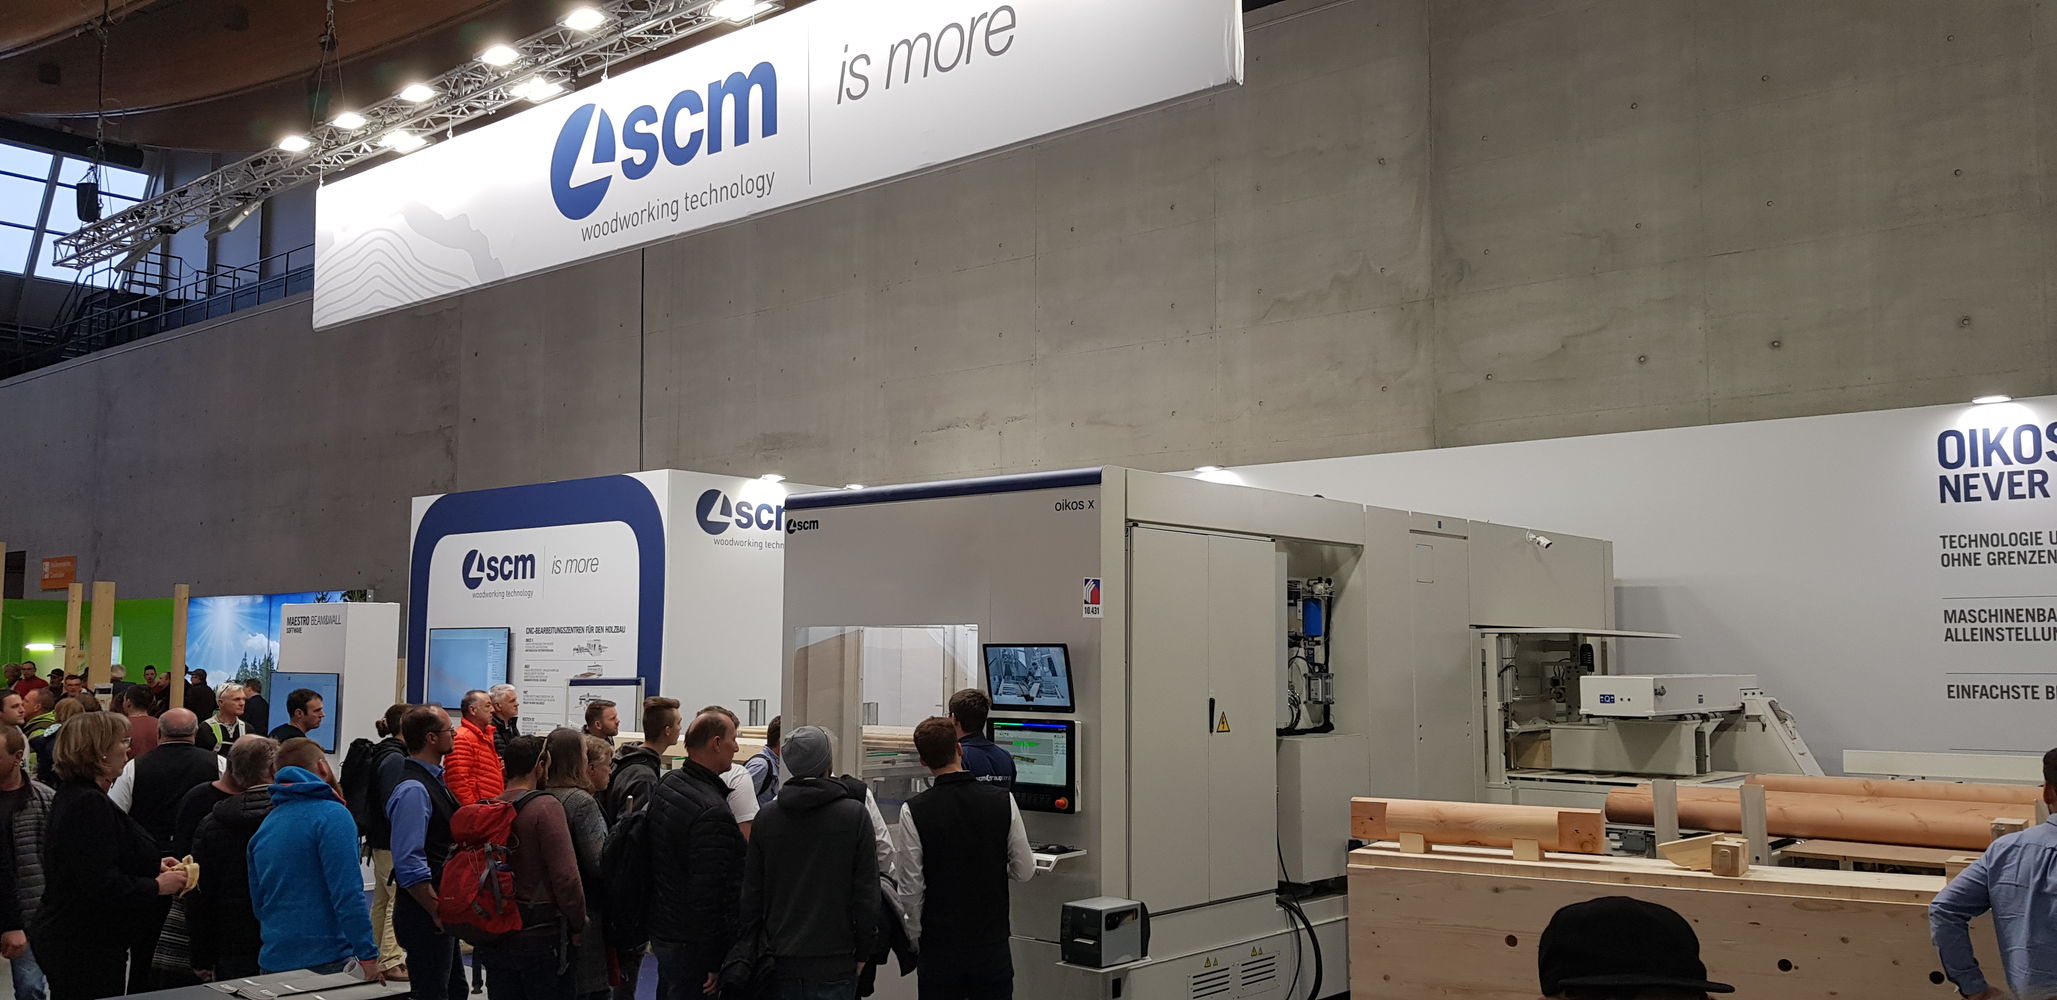 Dach+Holz continues with an excellent attendance at the SCM stand 